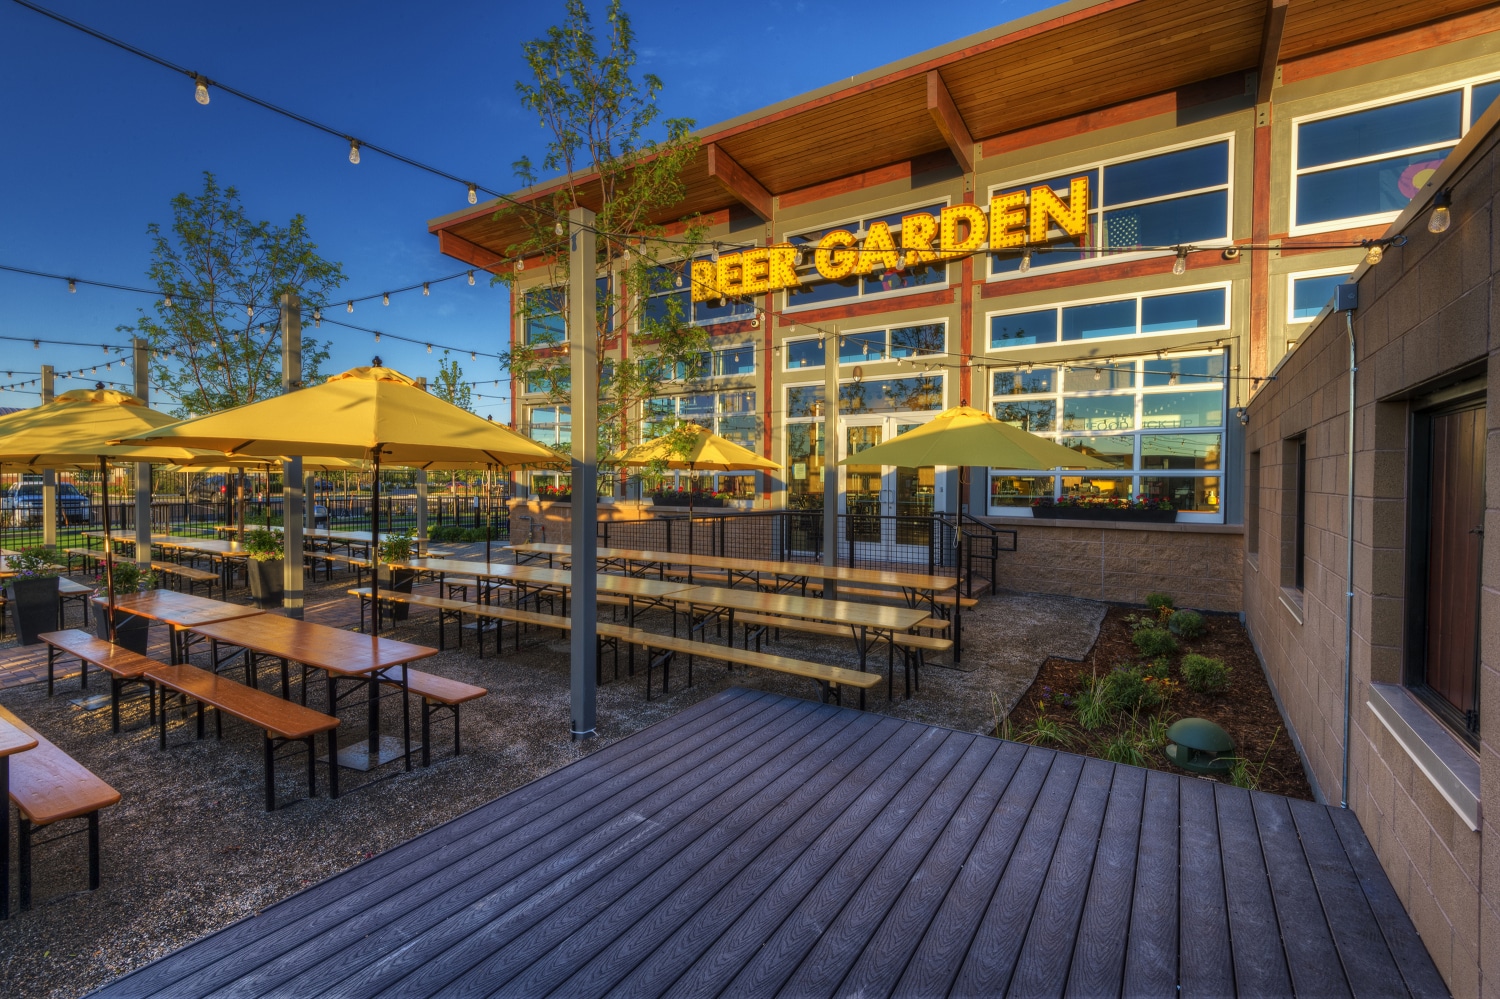 Image for Green Valley Ranch Beer Garden